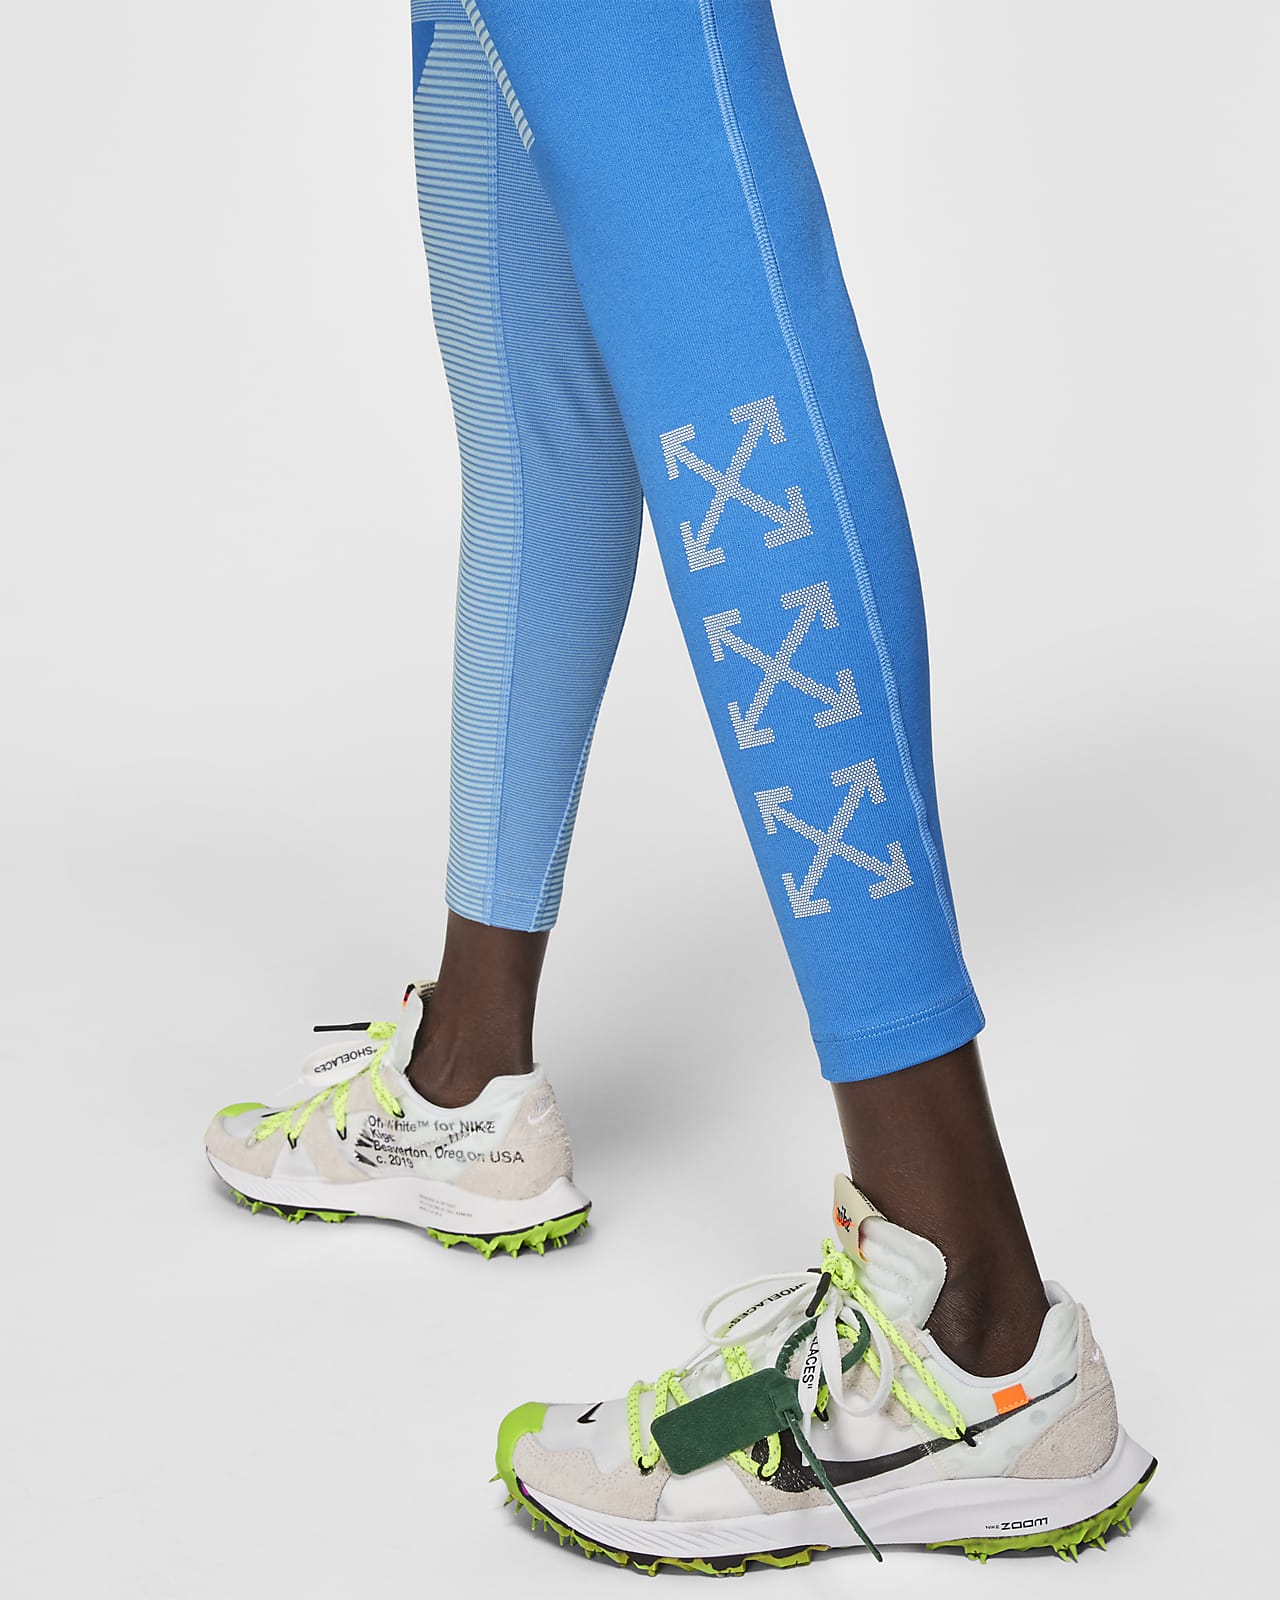 off white nike running tights